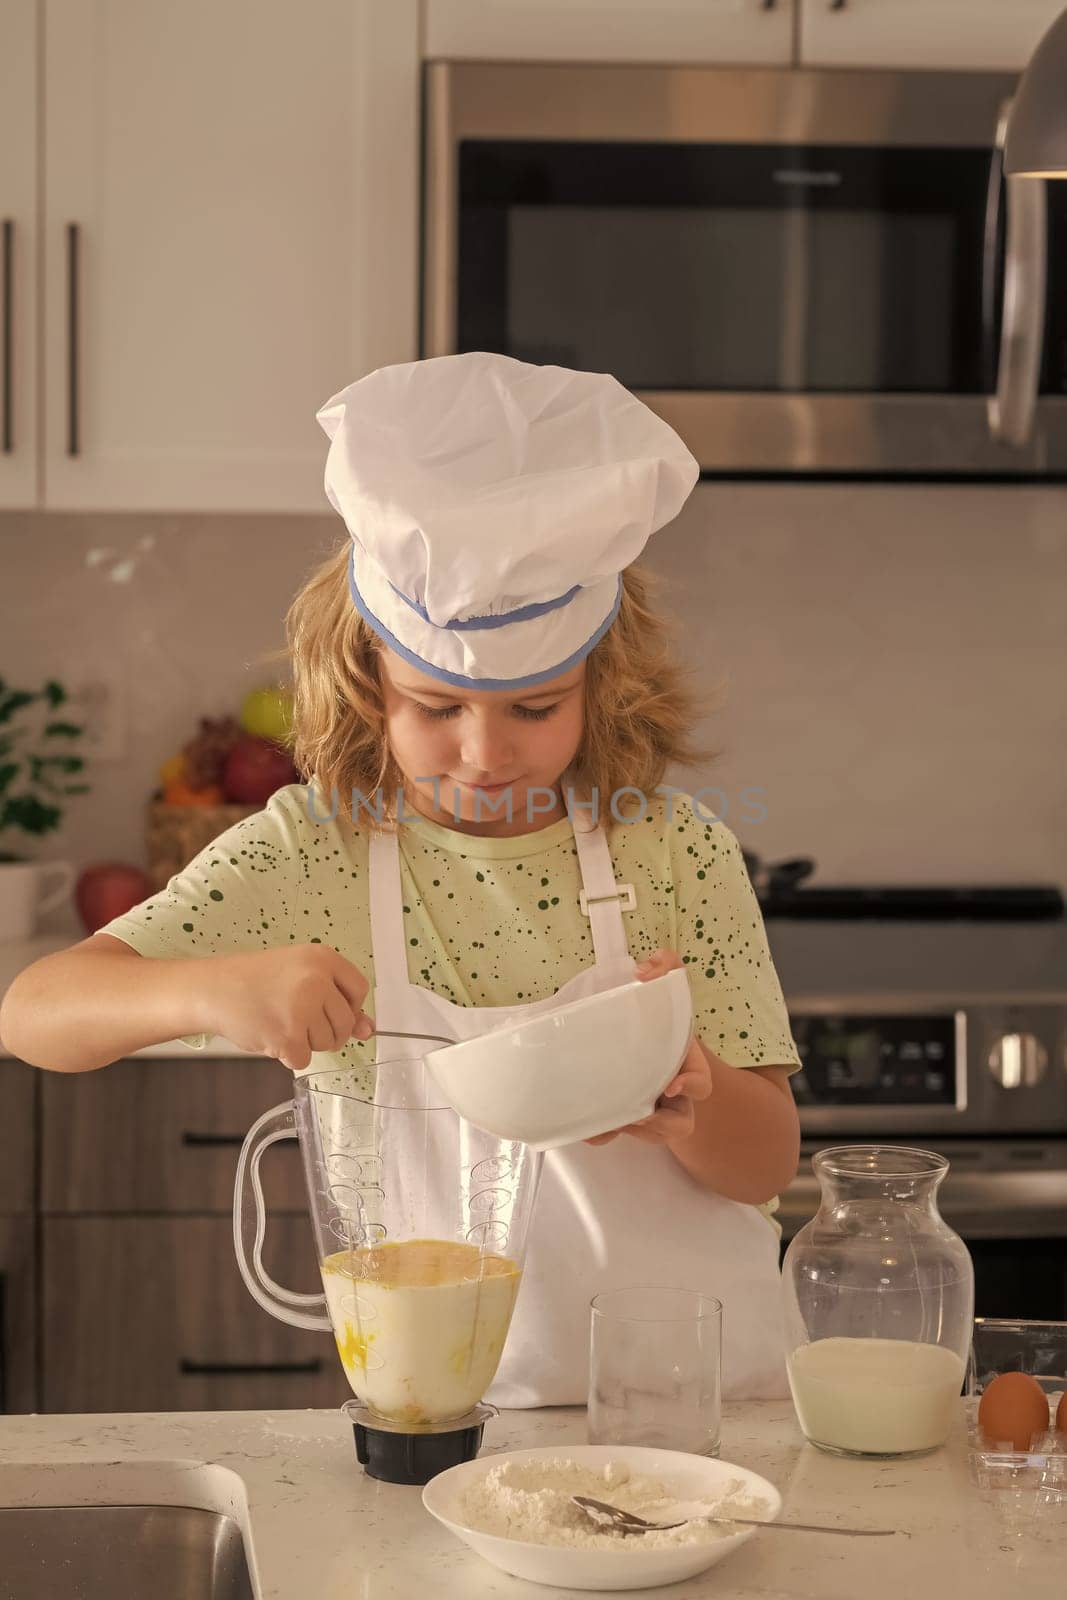 Children cooking in the kitchen. Funny kid chef cook cookery at kitchen. Chef kid boy making healthy food. Portrait of little child in chef hat